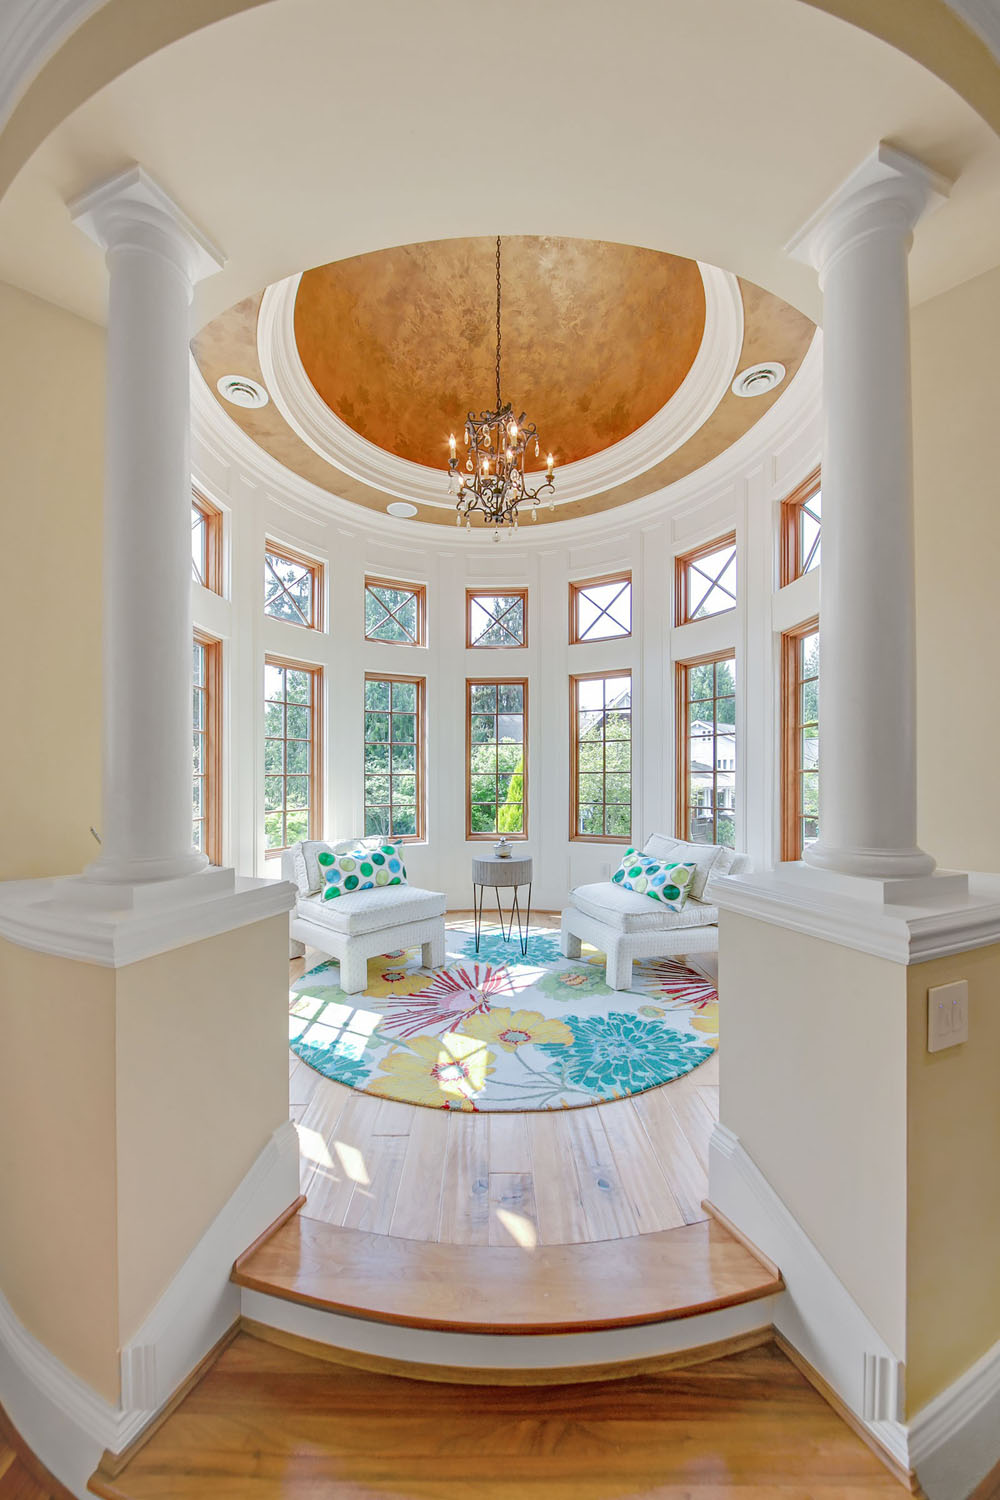 Round Sitting Nook with Decorative Columns and Dome Ceiling